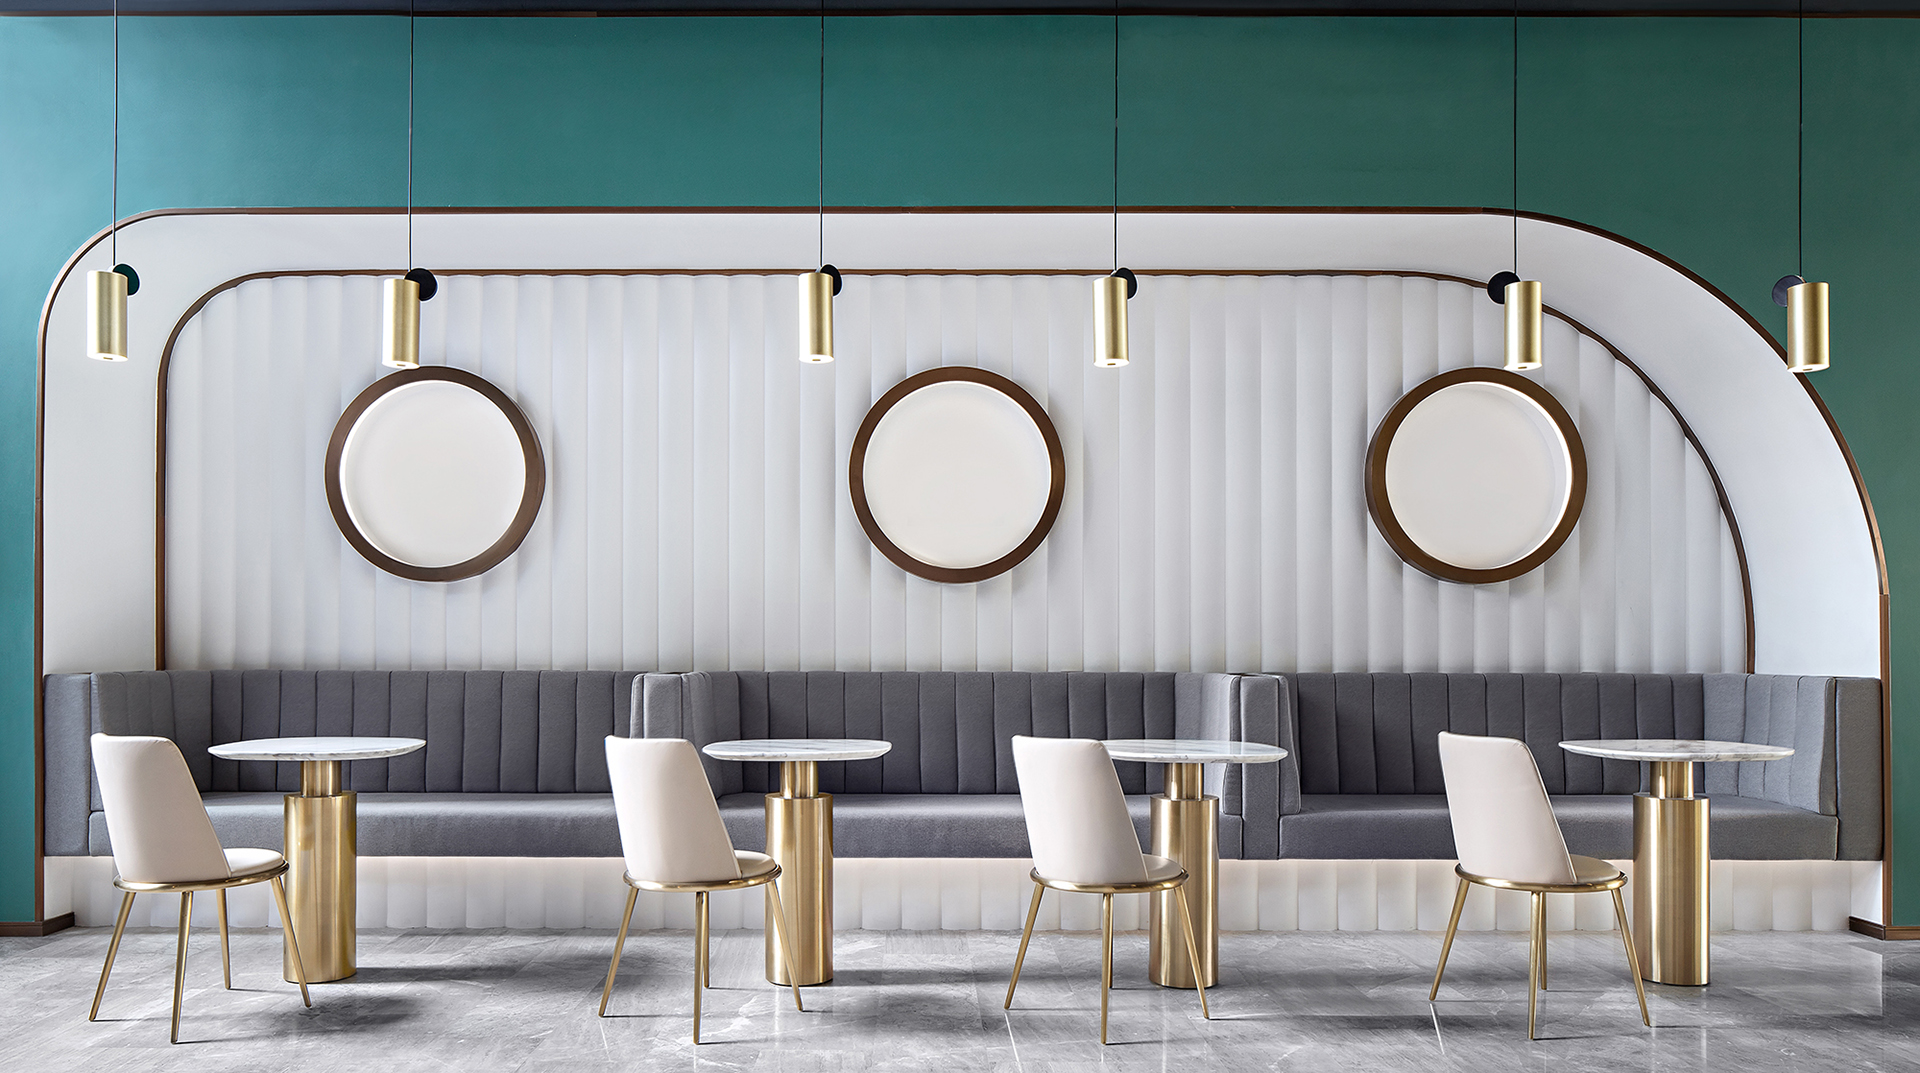 cafeteria wall cladding mirror table metal gold